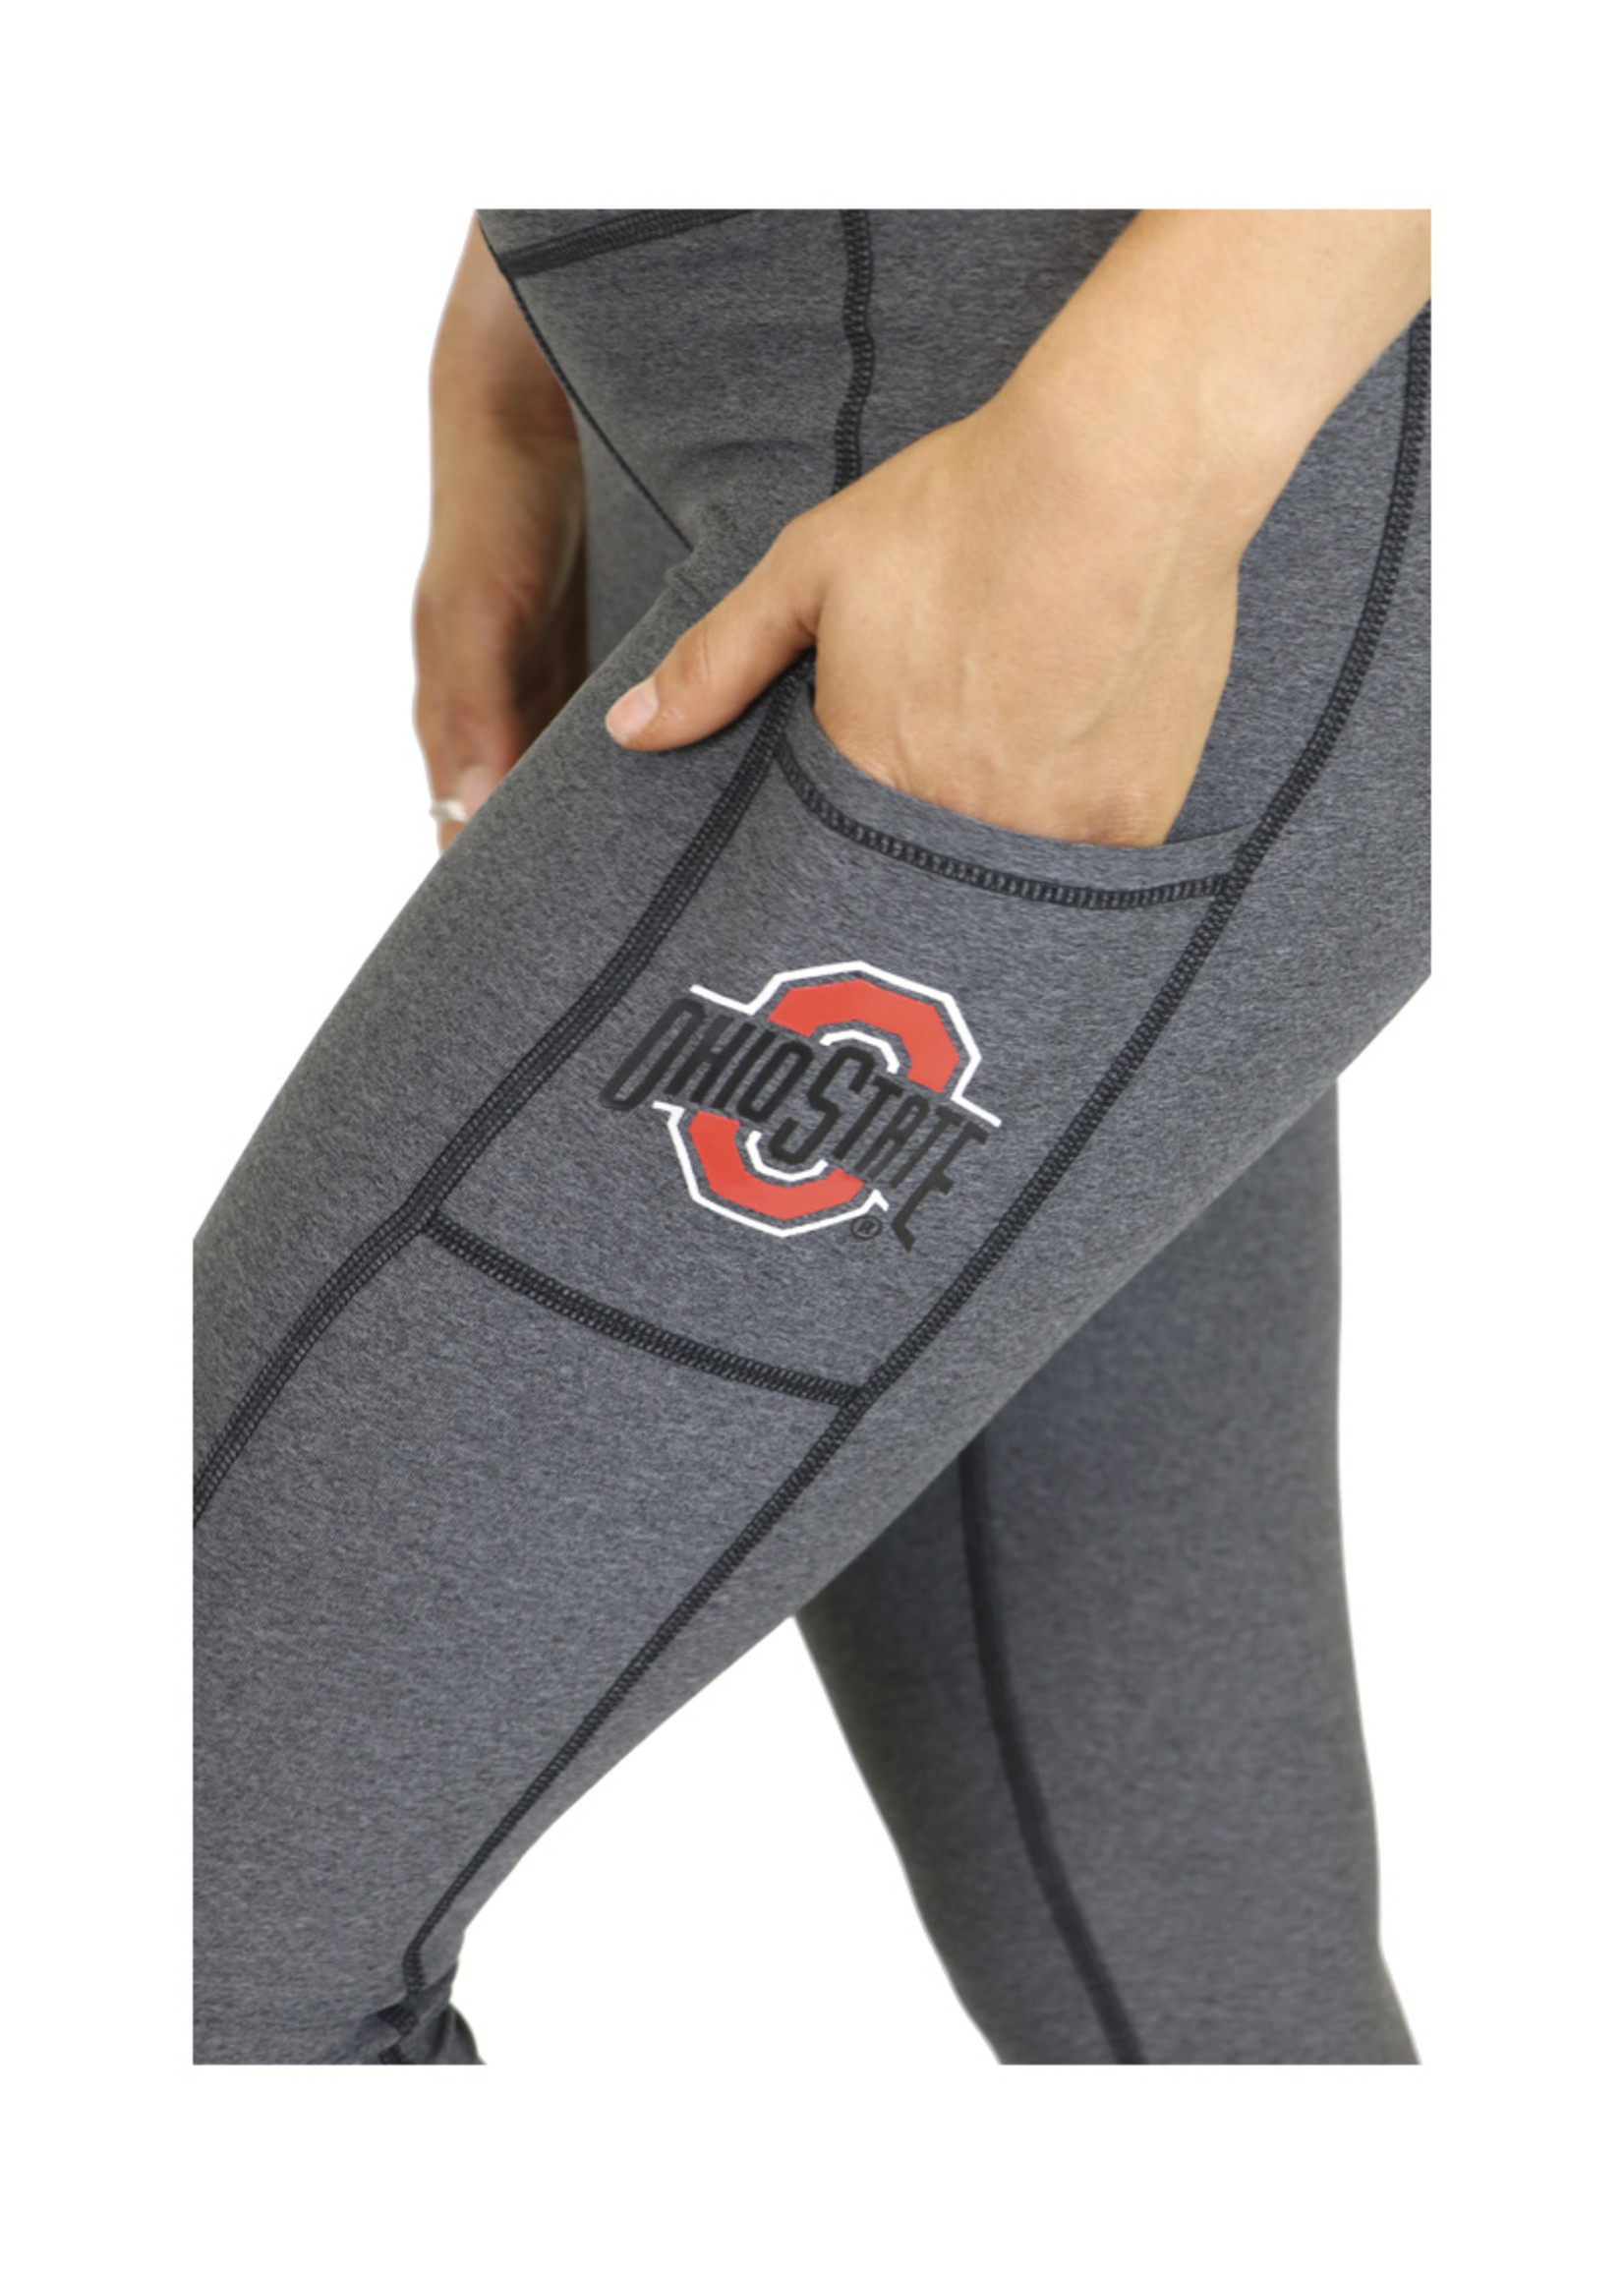 Bend The Ohio State University "Victory" Cell Phone Pocket Legging/Charcoal